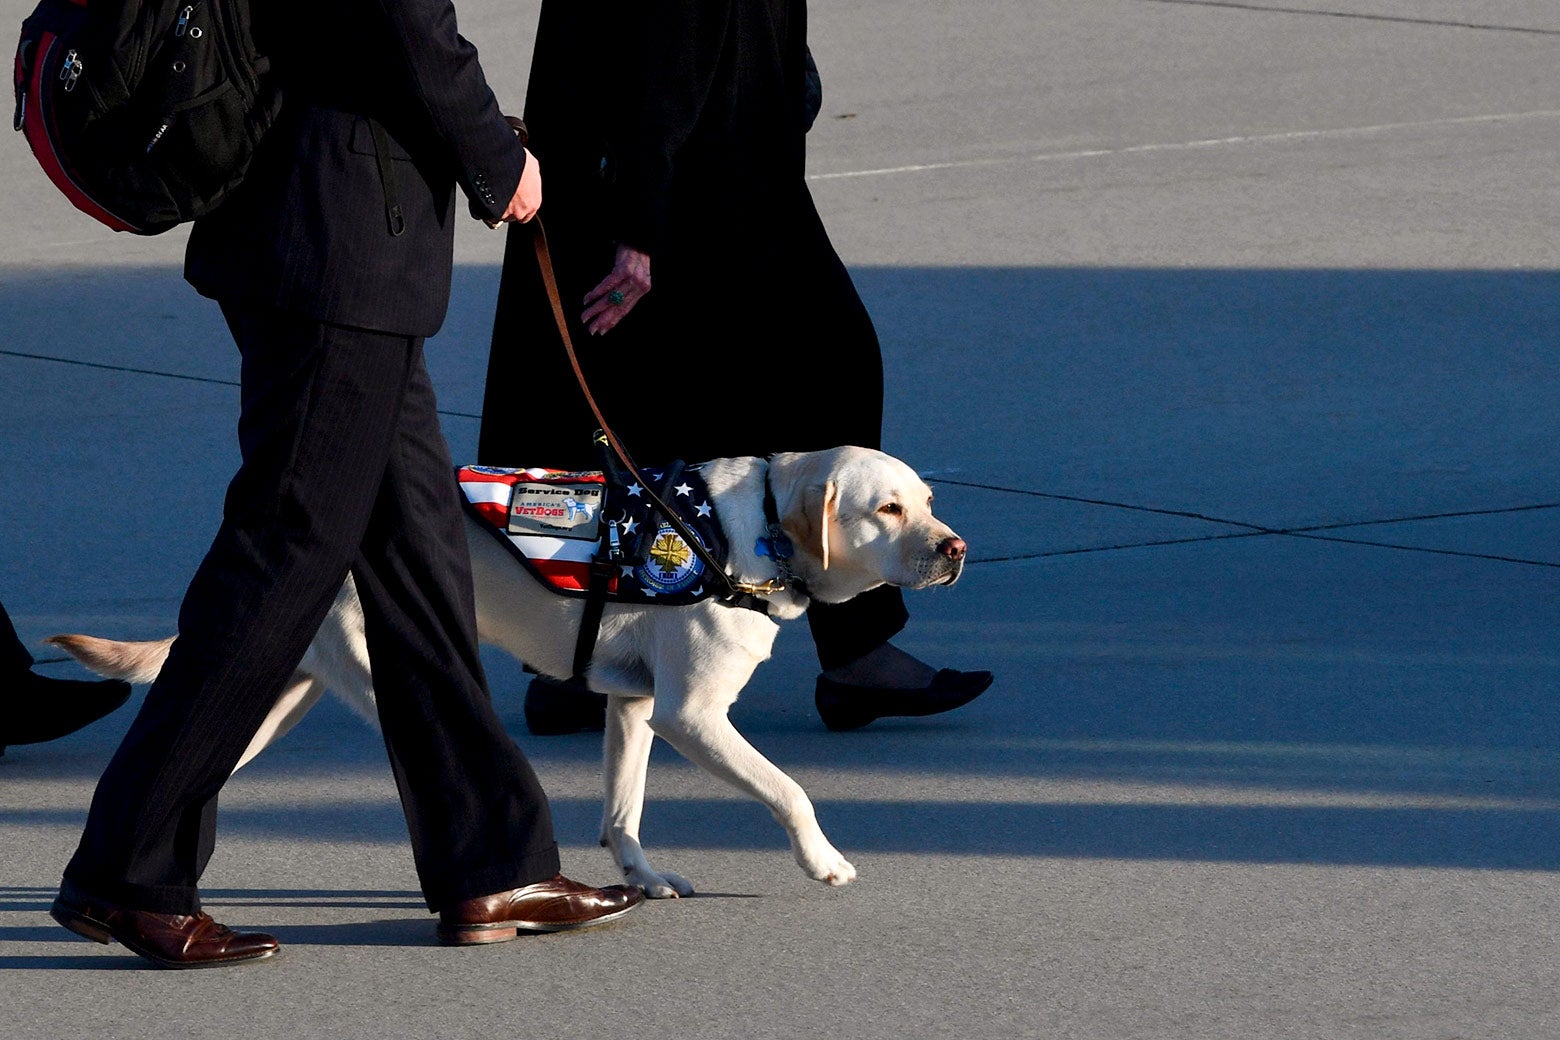 Sully, the Lab retriever, walks on the tarmac at Joint Base Andrews on Monday after former President George H.W. Bush's casket is carried to a hearse.